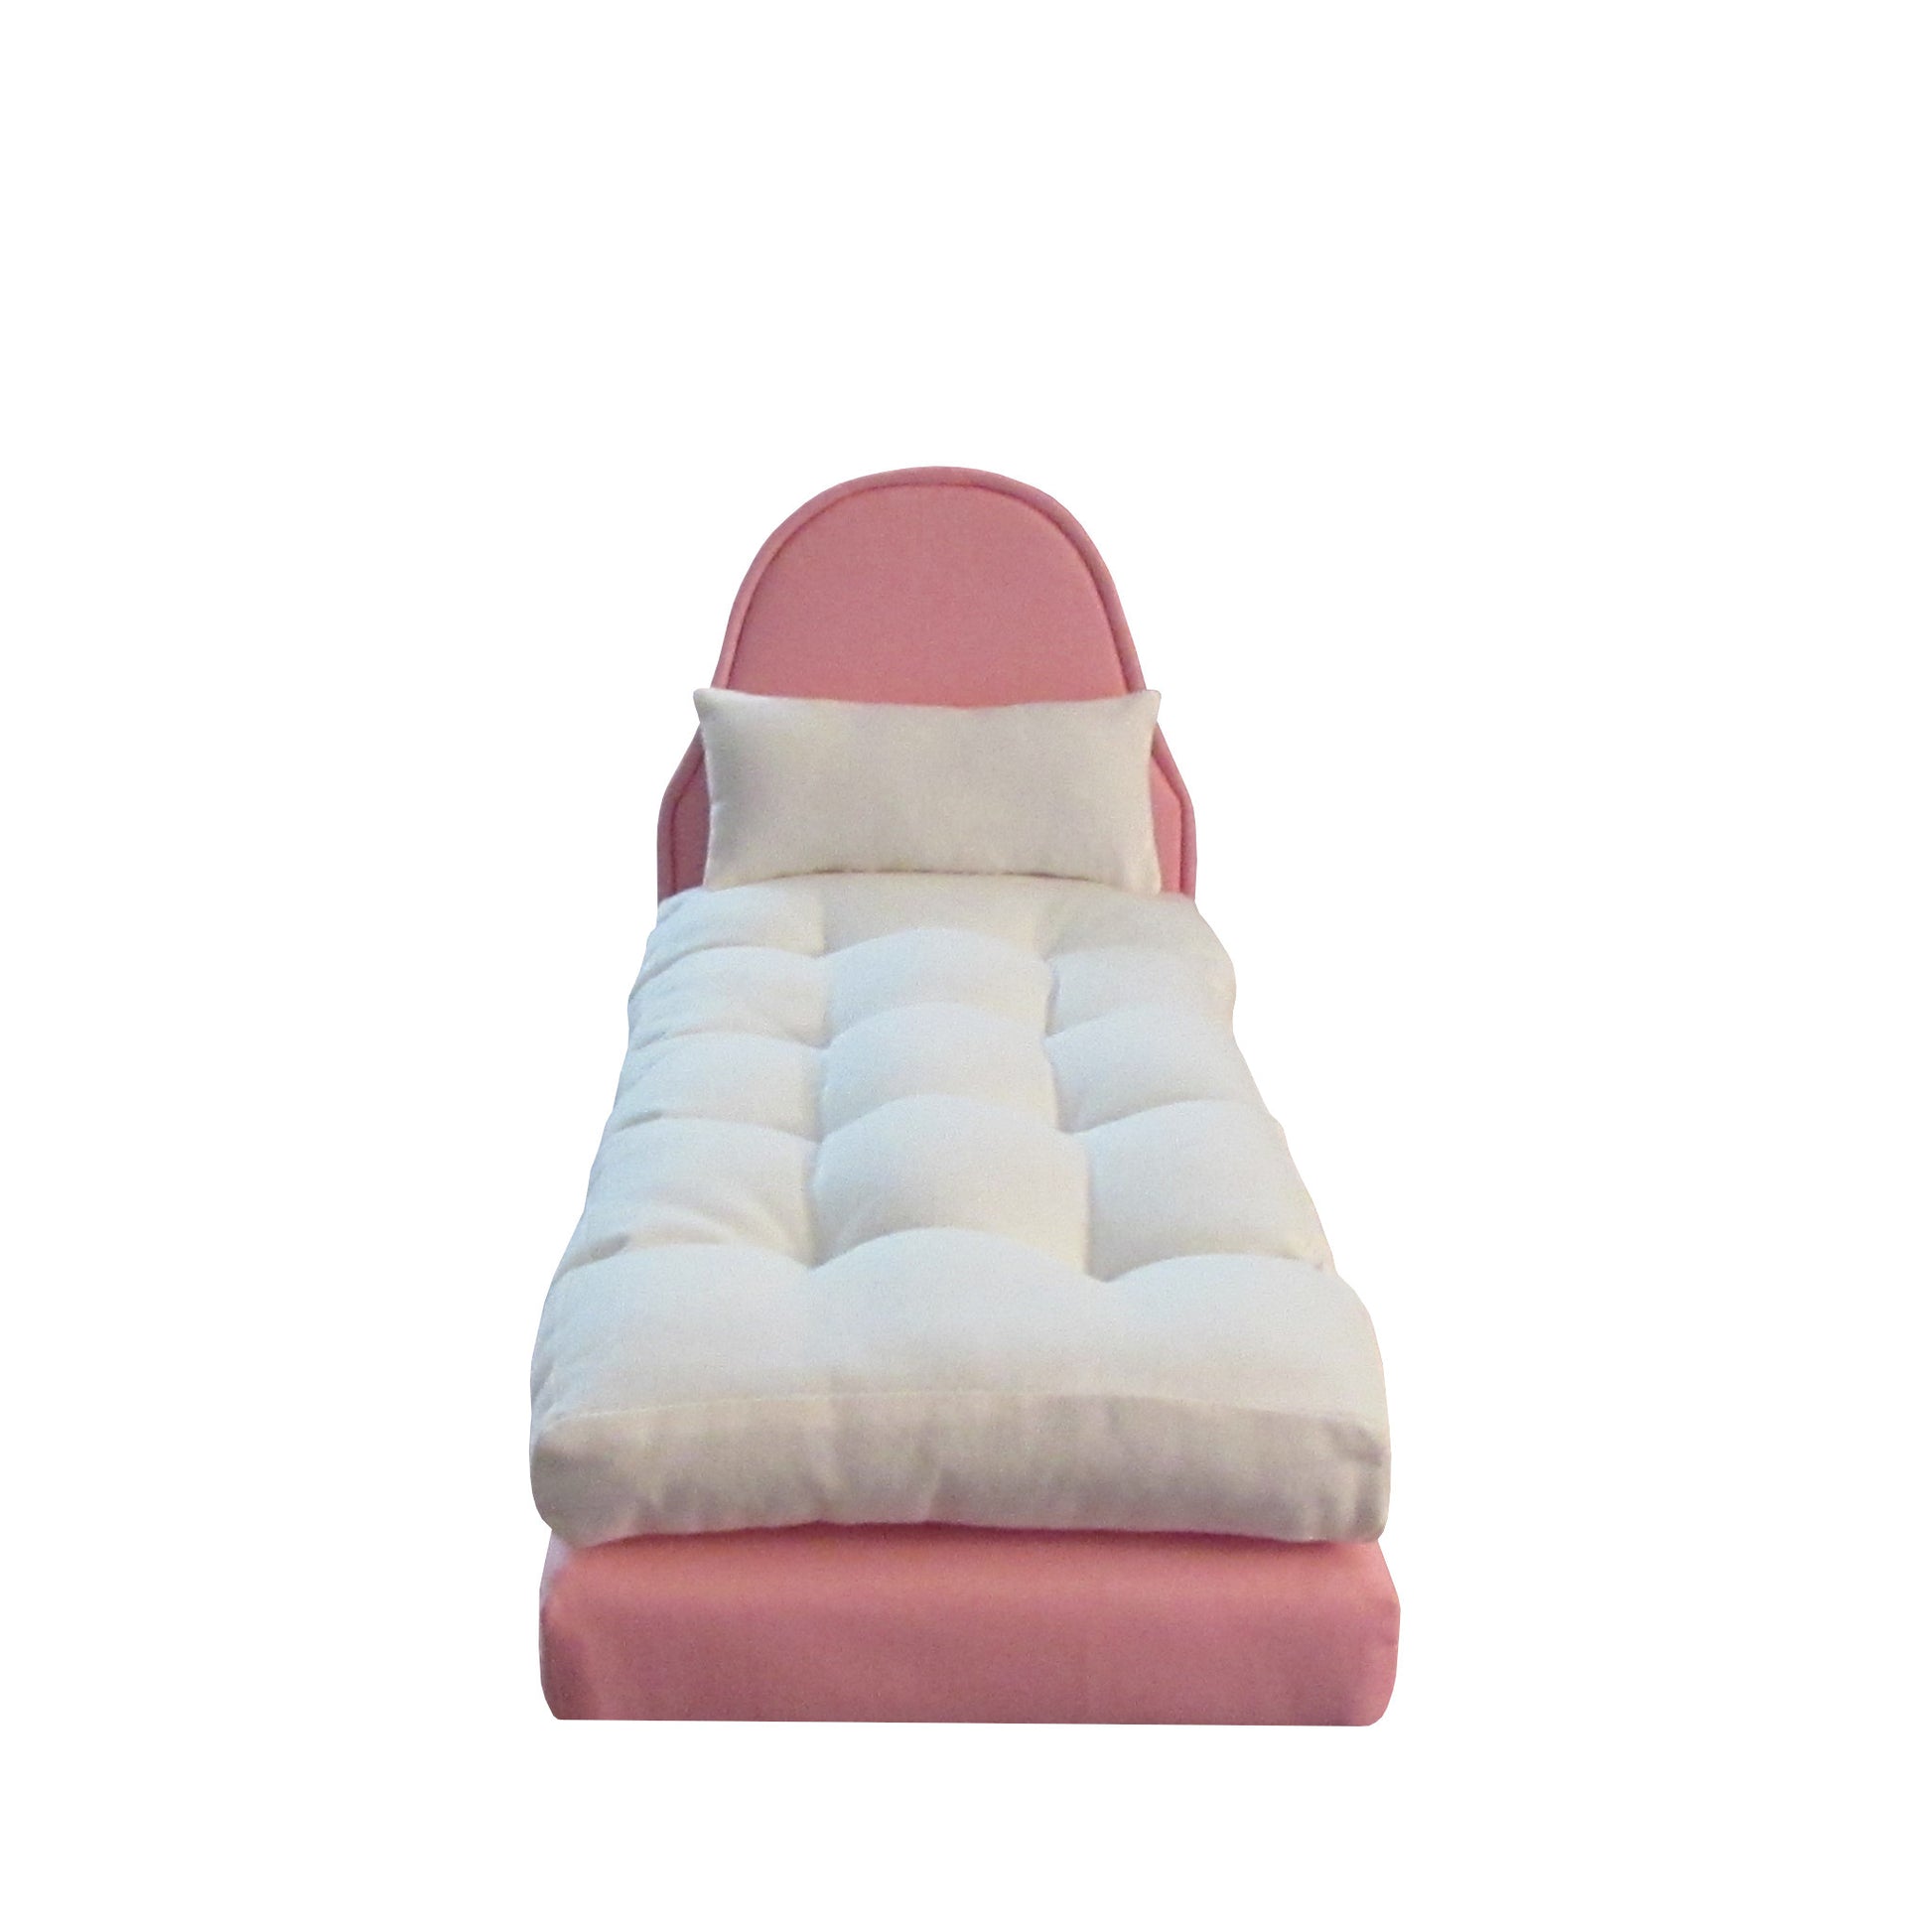 Upholstered Light Pink Doll Bed for 11.5-inch and 12-inch dolls Front view